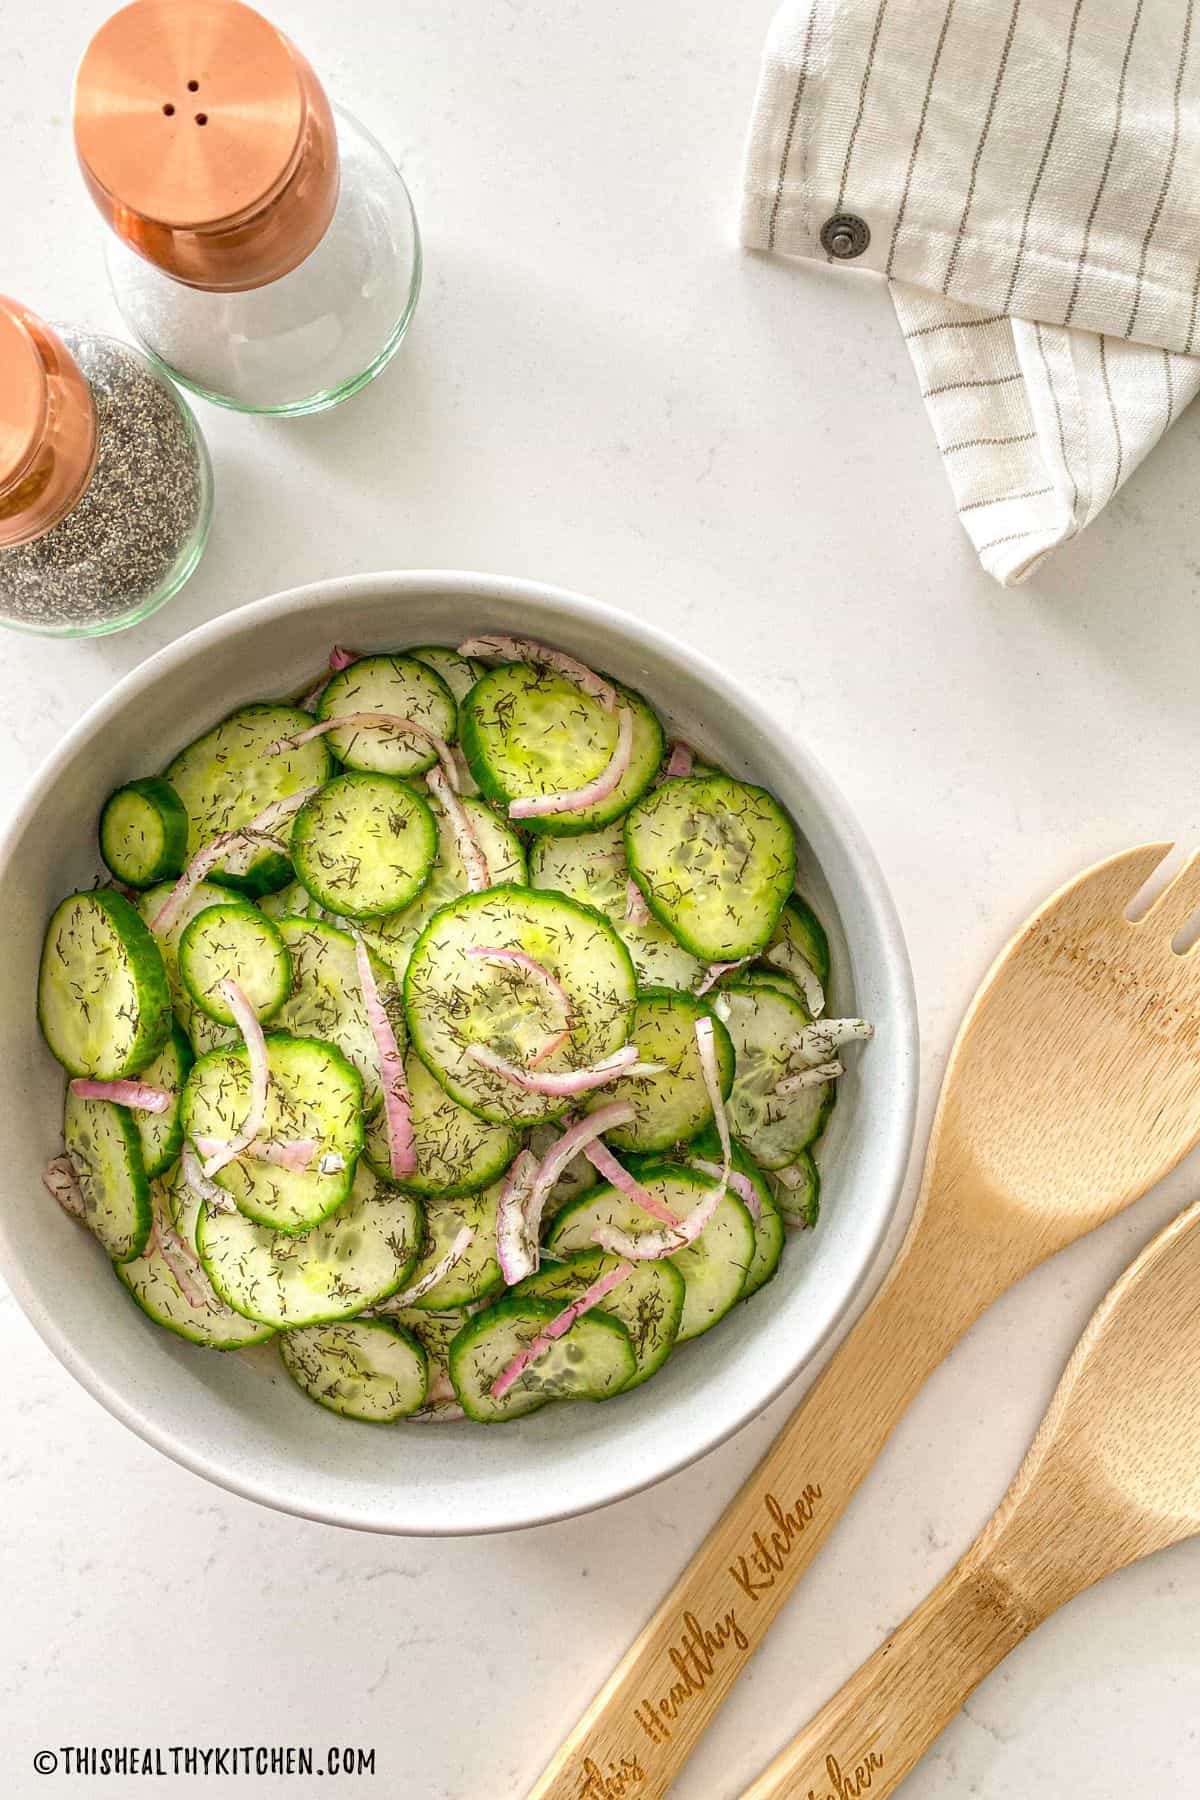 Cucumber salad with dill in serving bowl with salt and pepper shakers above it.